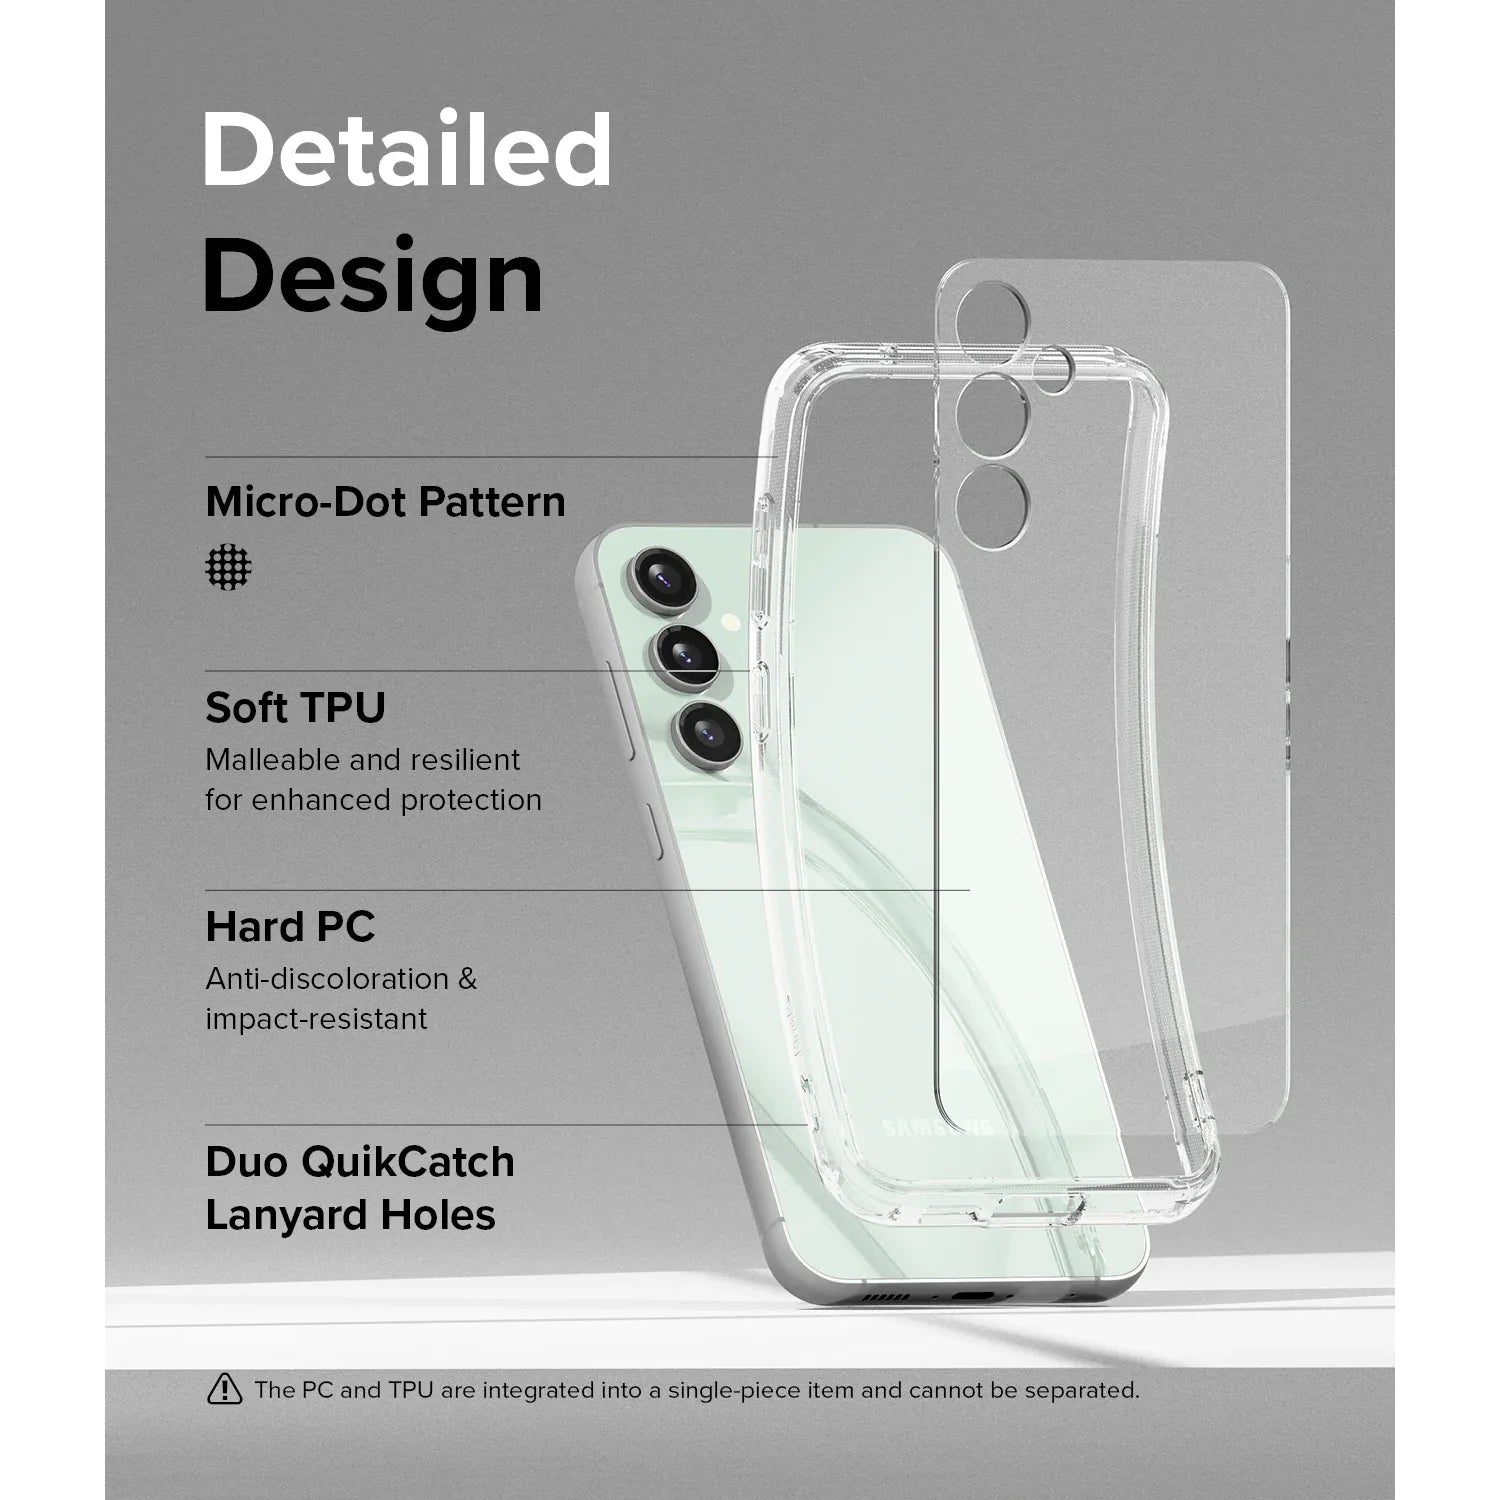 Ringke Fusion Case for Samsung Galaxy S23 FE